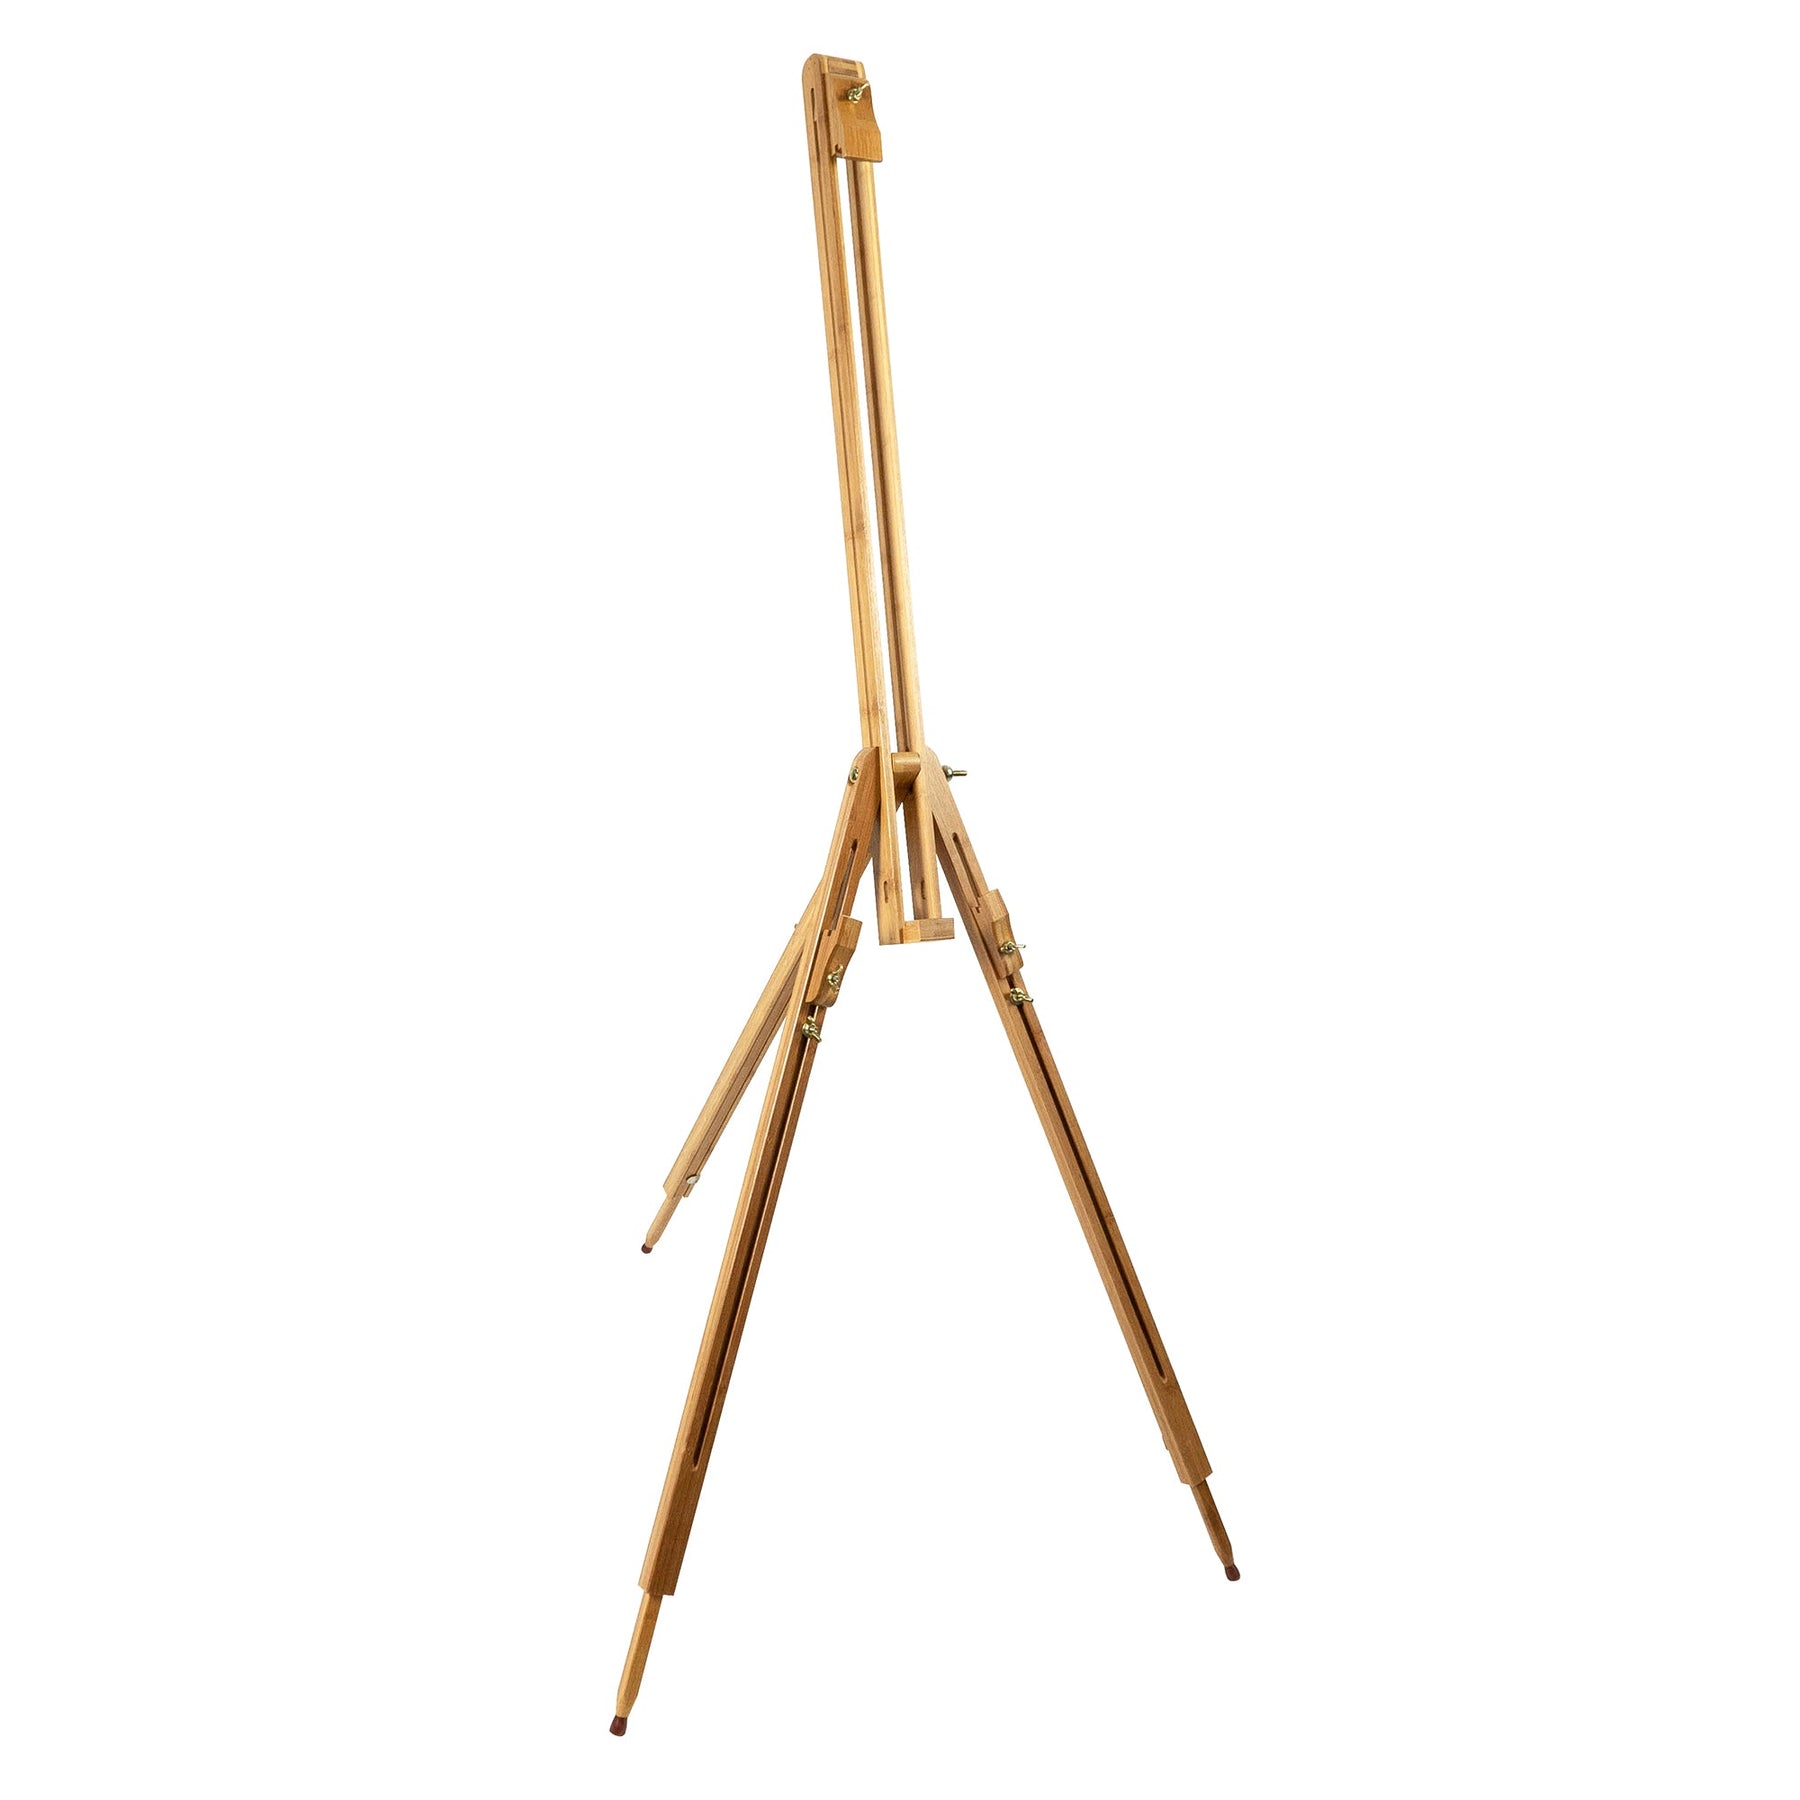 Pacific Arc - Field Bamboo Professional Foldable Studio Easel, 41 Inch Canvas Size for watercolors, painting, drawing, sketching, and display